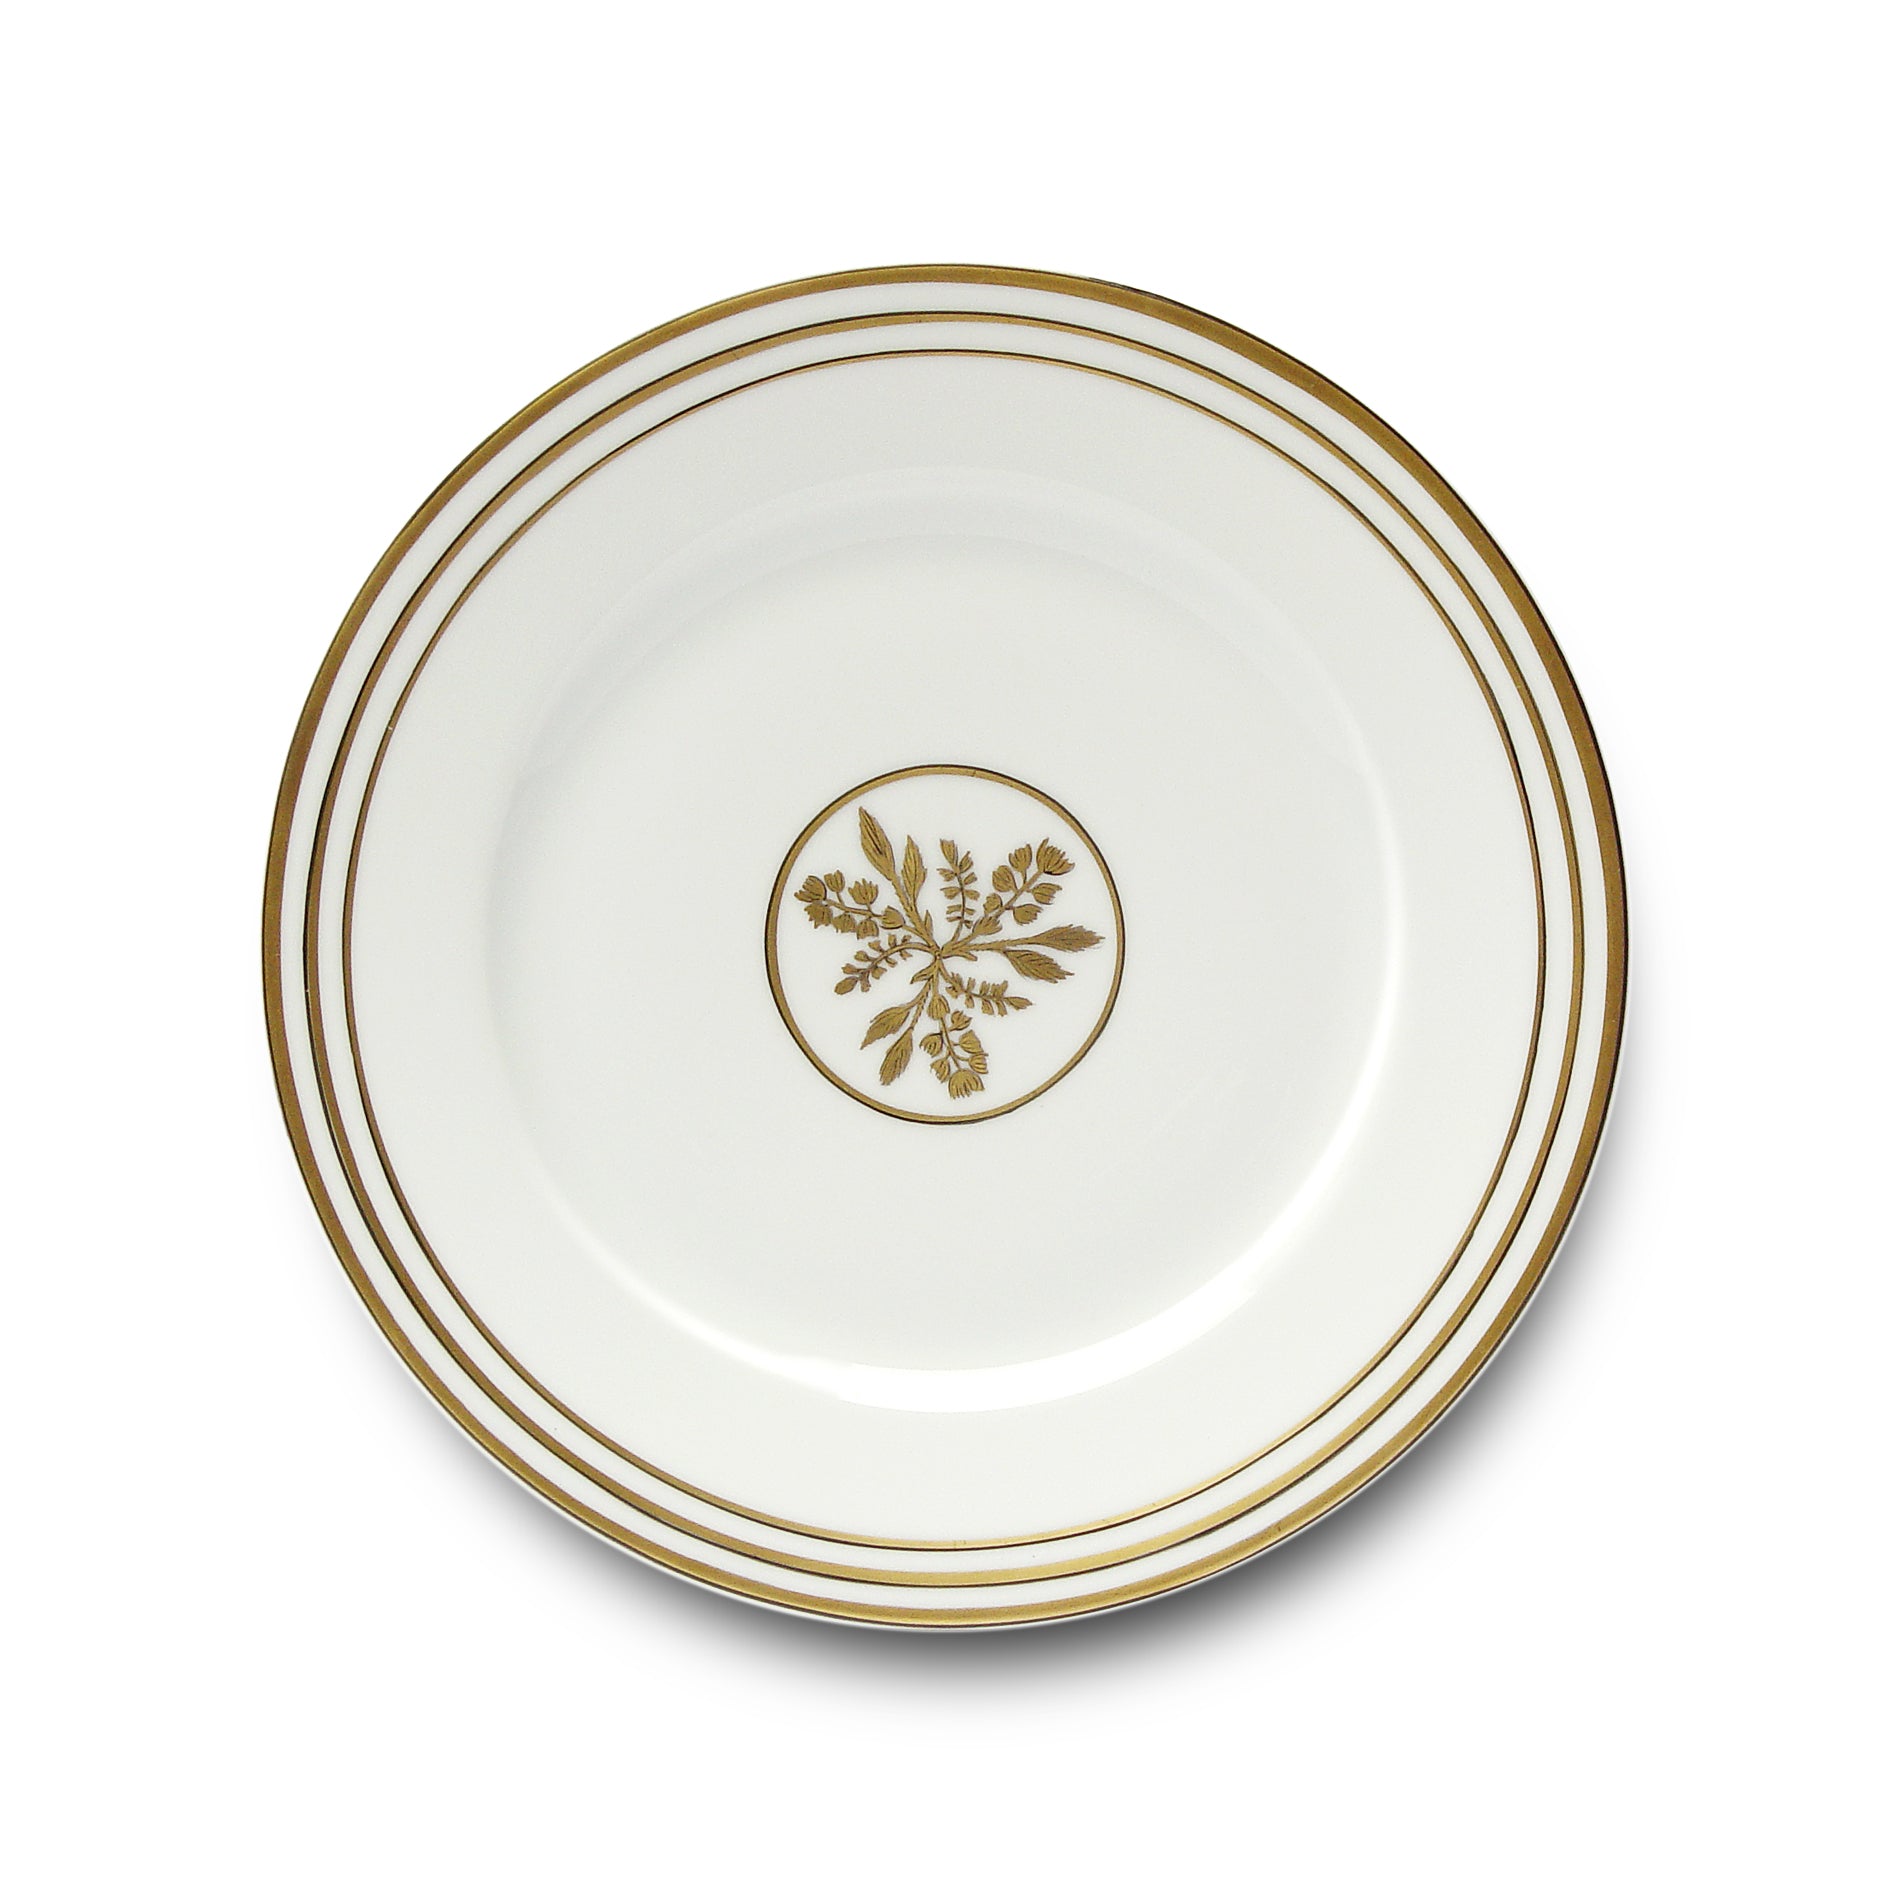 Or des Airs - Or des Mers - Assiette plate 05